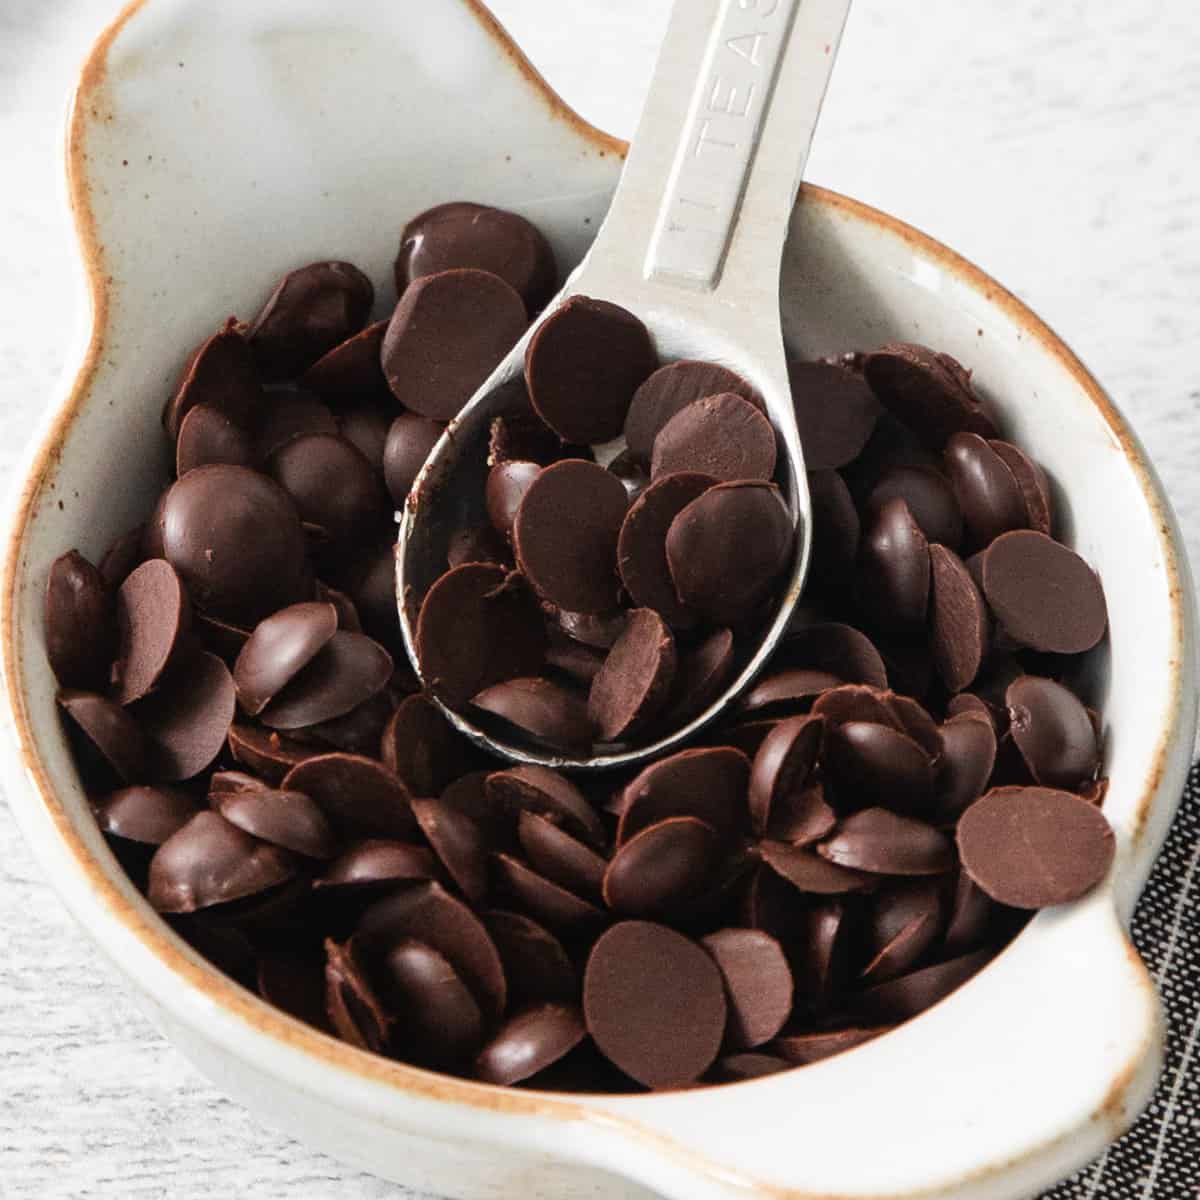 Home made Vegan Chocolate Chips – Match Foodie Finds